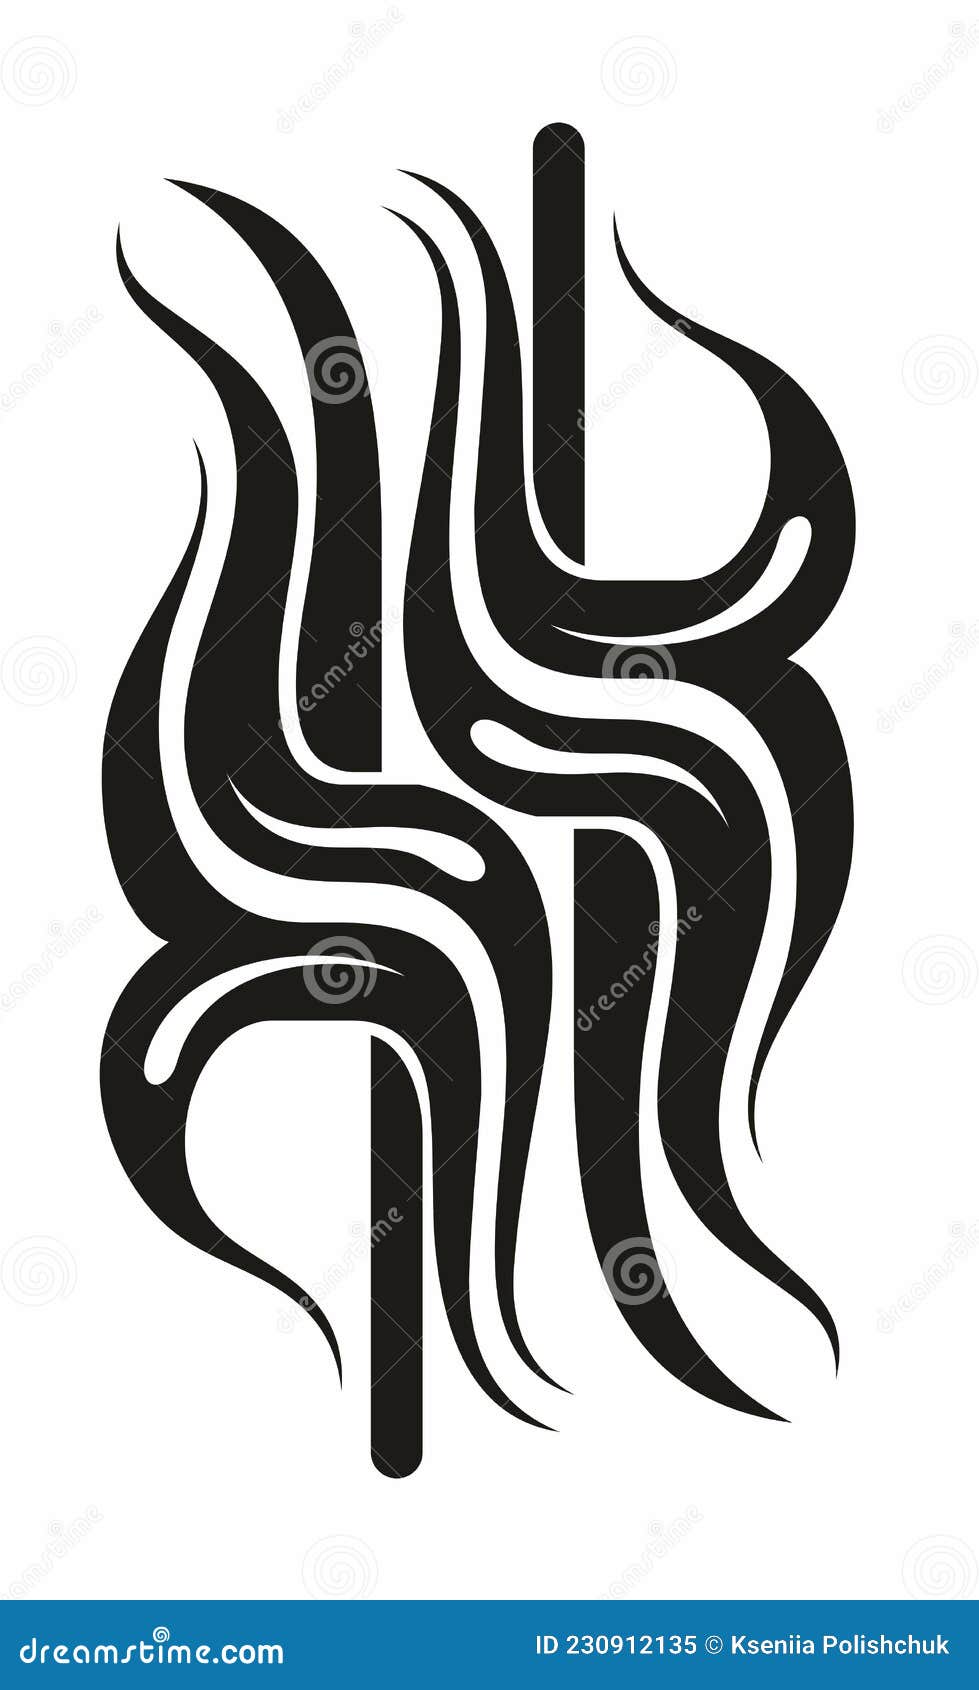 Tattoo Tribal Abstract Element, Black Arm Shoulder Tattoo Fantasy Pattern  Vector, Sketch. Vector Illustration of a Tribal Tattoo. Stock Vector -  Illustration of abstract, icon: 230912135